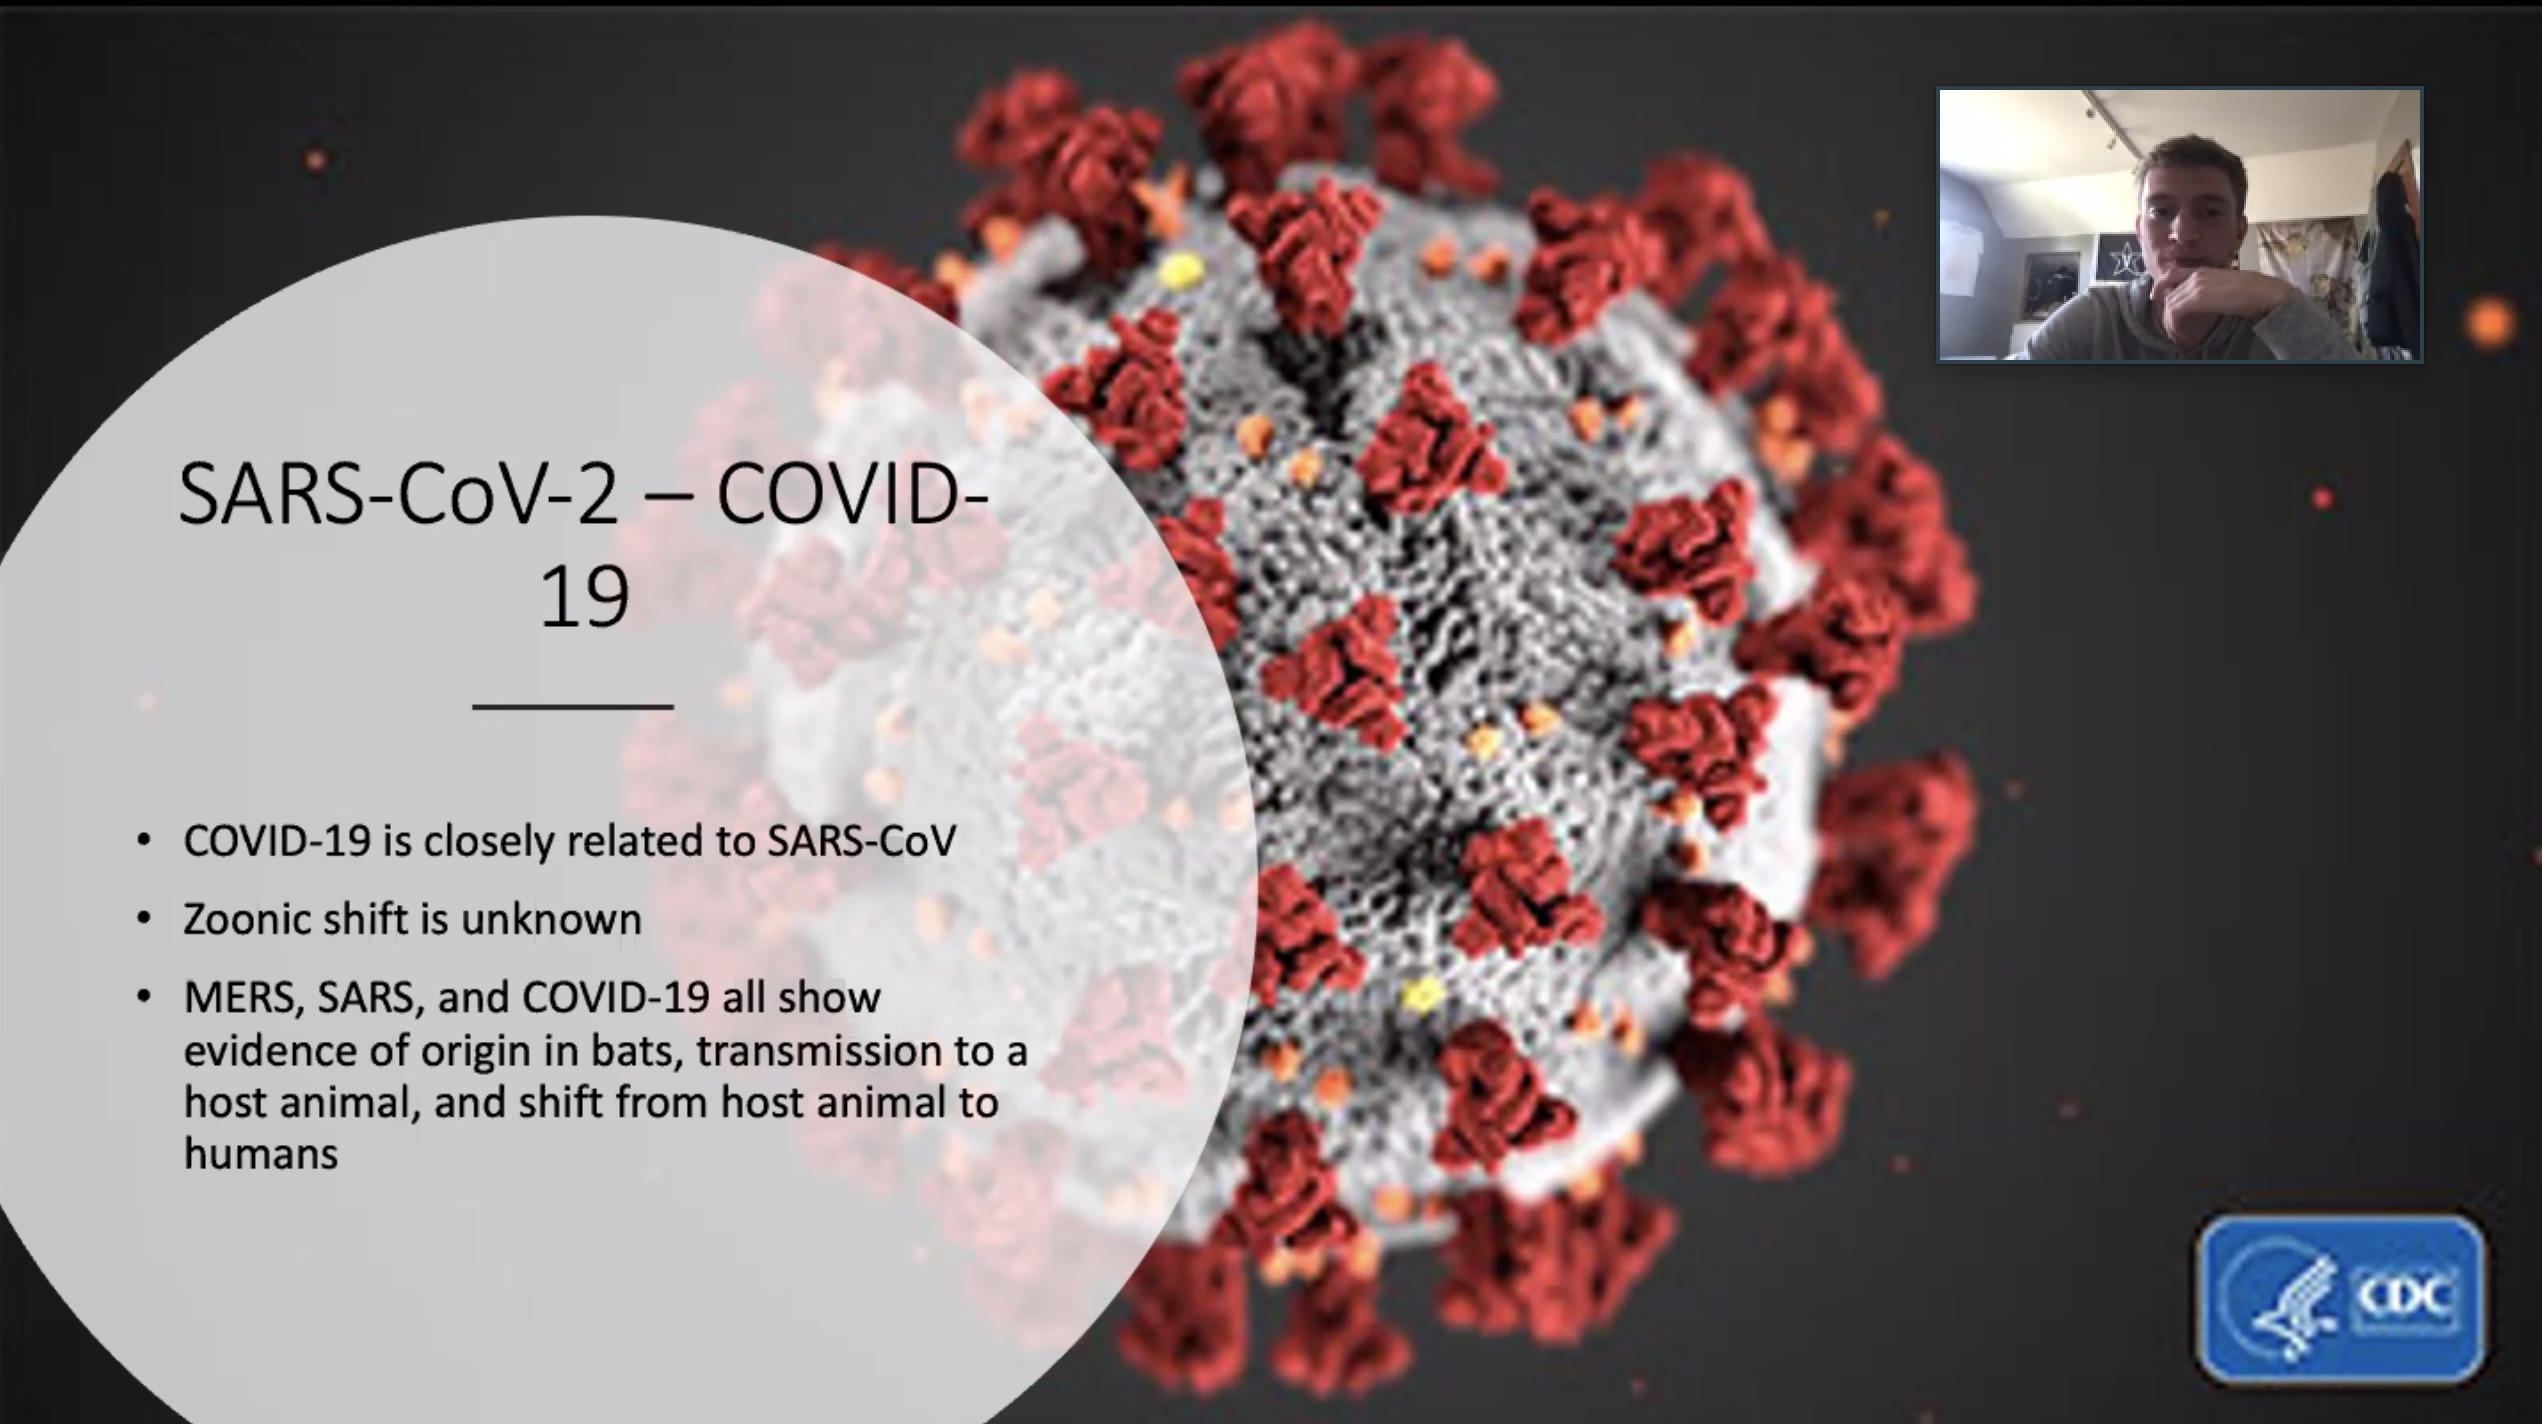 screen shot of a student presentation on Zoom, showing a graphic of the novel coronavirus, presentation title, and student's face